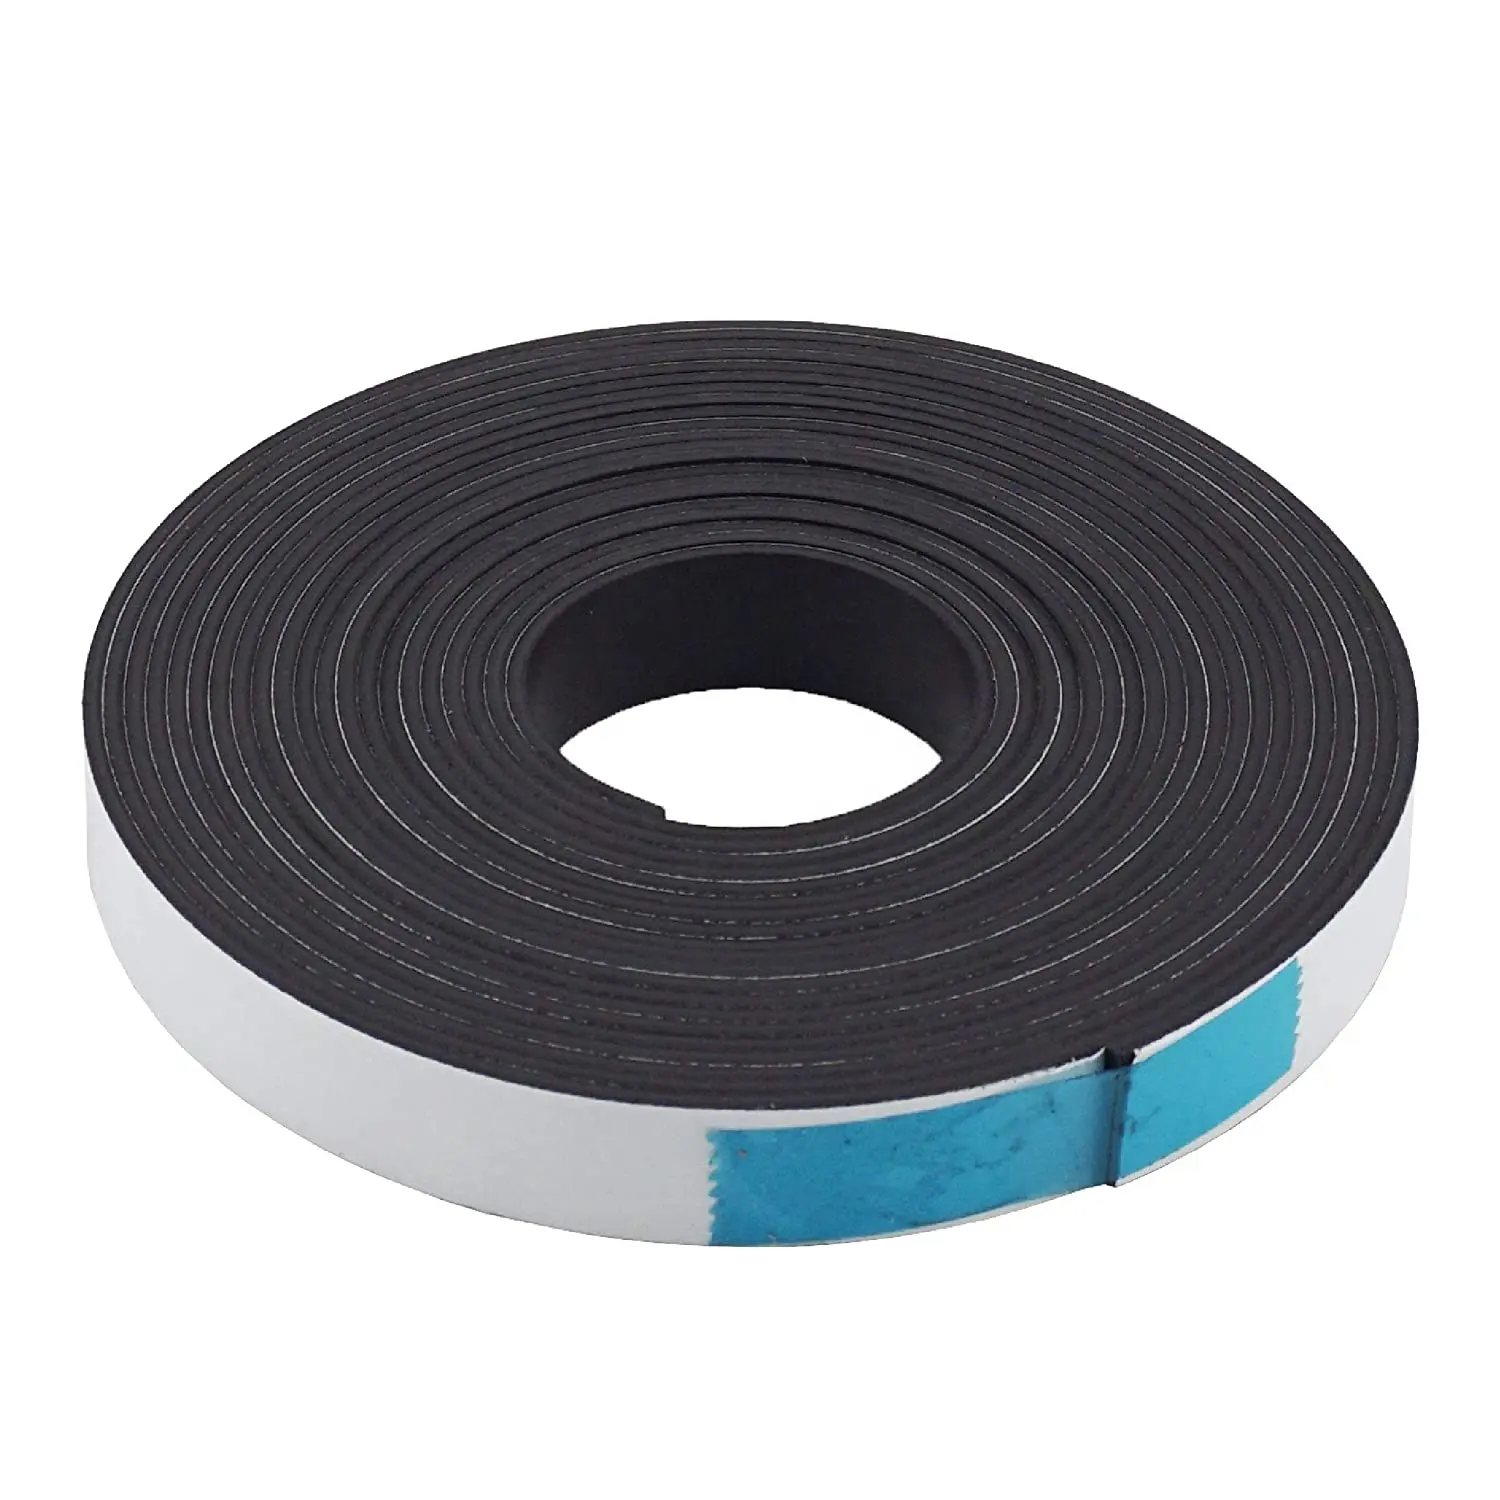 Custom Size Double Sided Self Adhesive Neodymium Rubber Magnet Strip Thin Strong Magnet Strip Flexible Magnetic Tape Roll